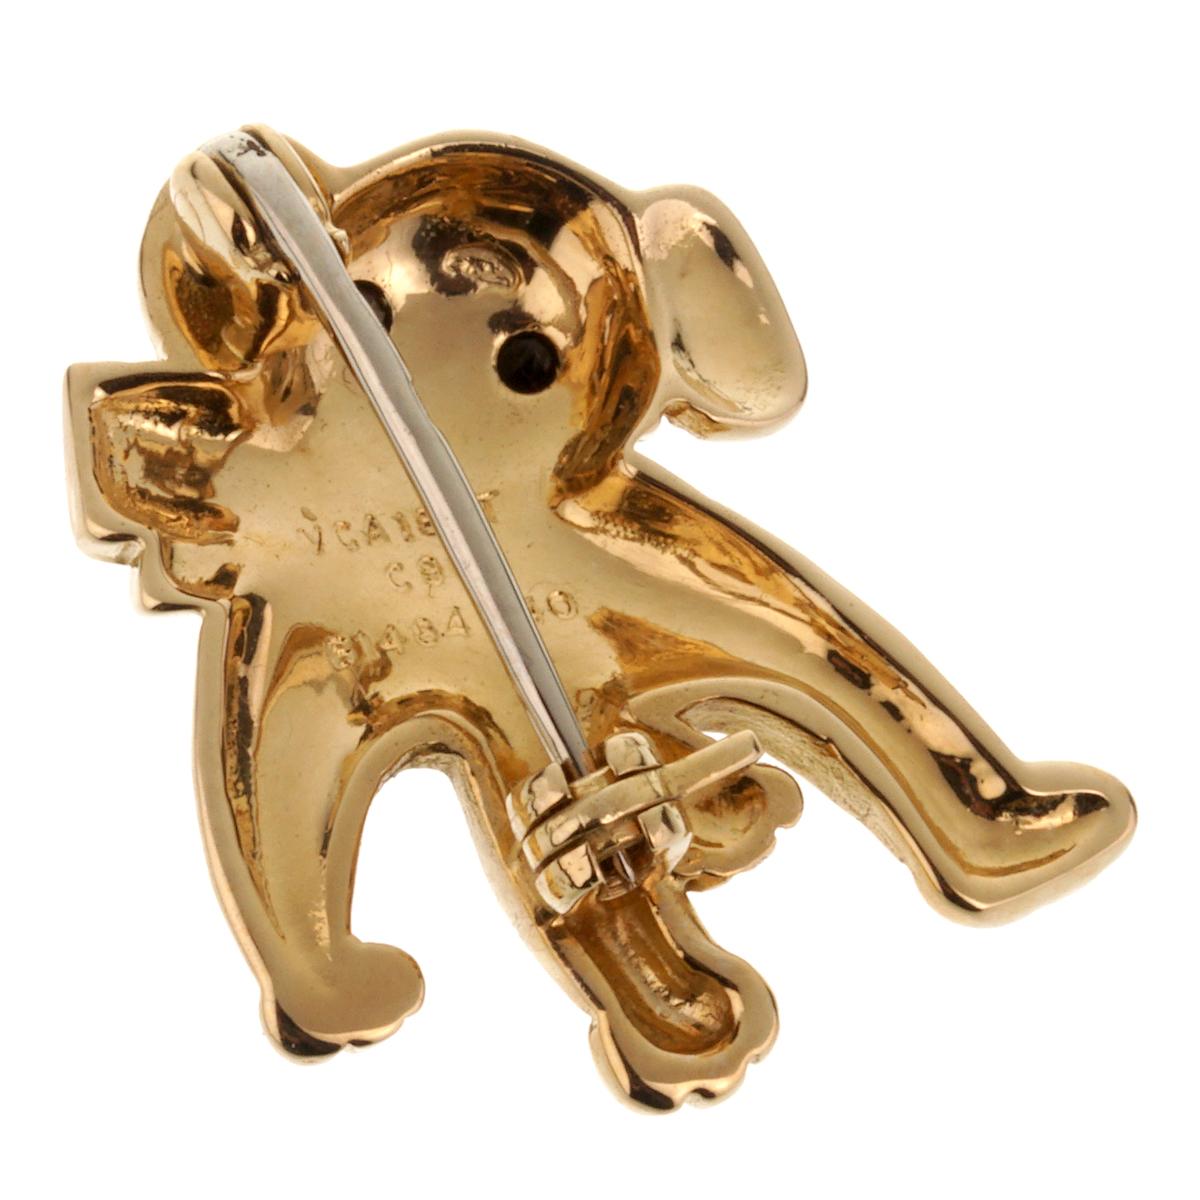 A fabulous authentic Van Cleef & Arpels brooch pendant depicting a dog fetching a newpapers in 18k yellow gold.

Measures .62” in height by .78” in width 